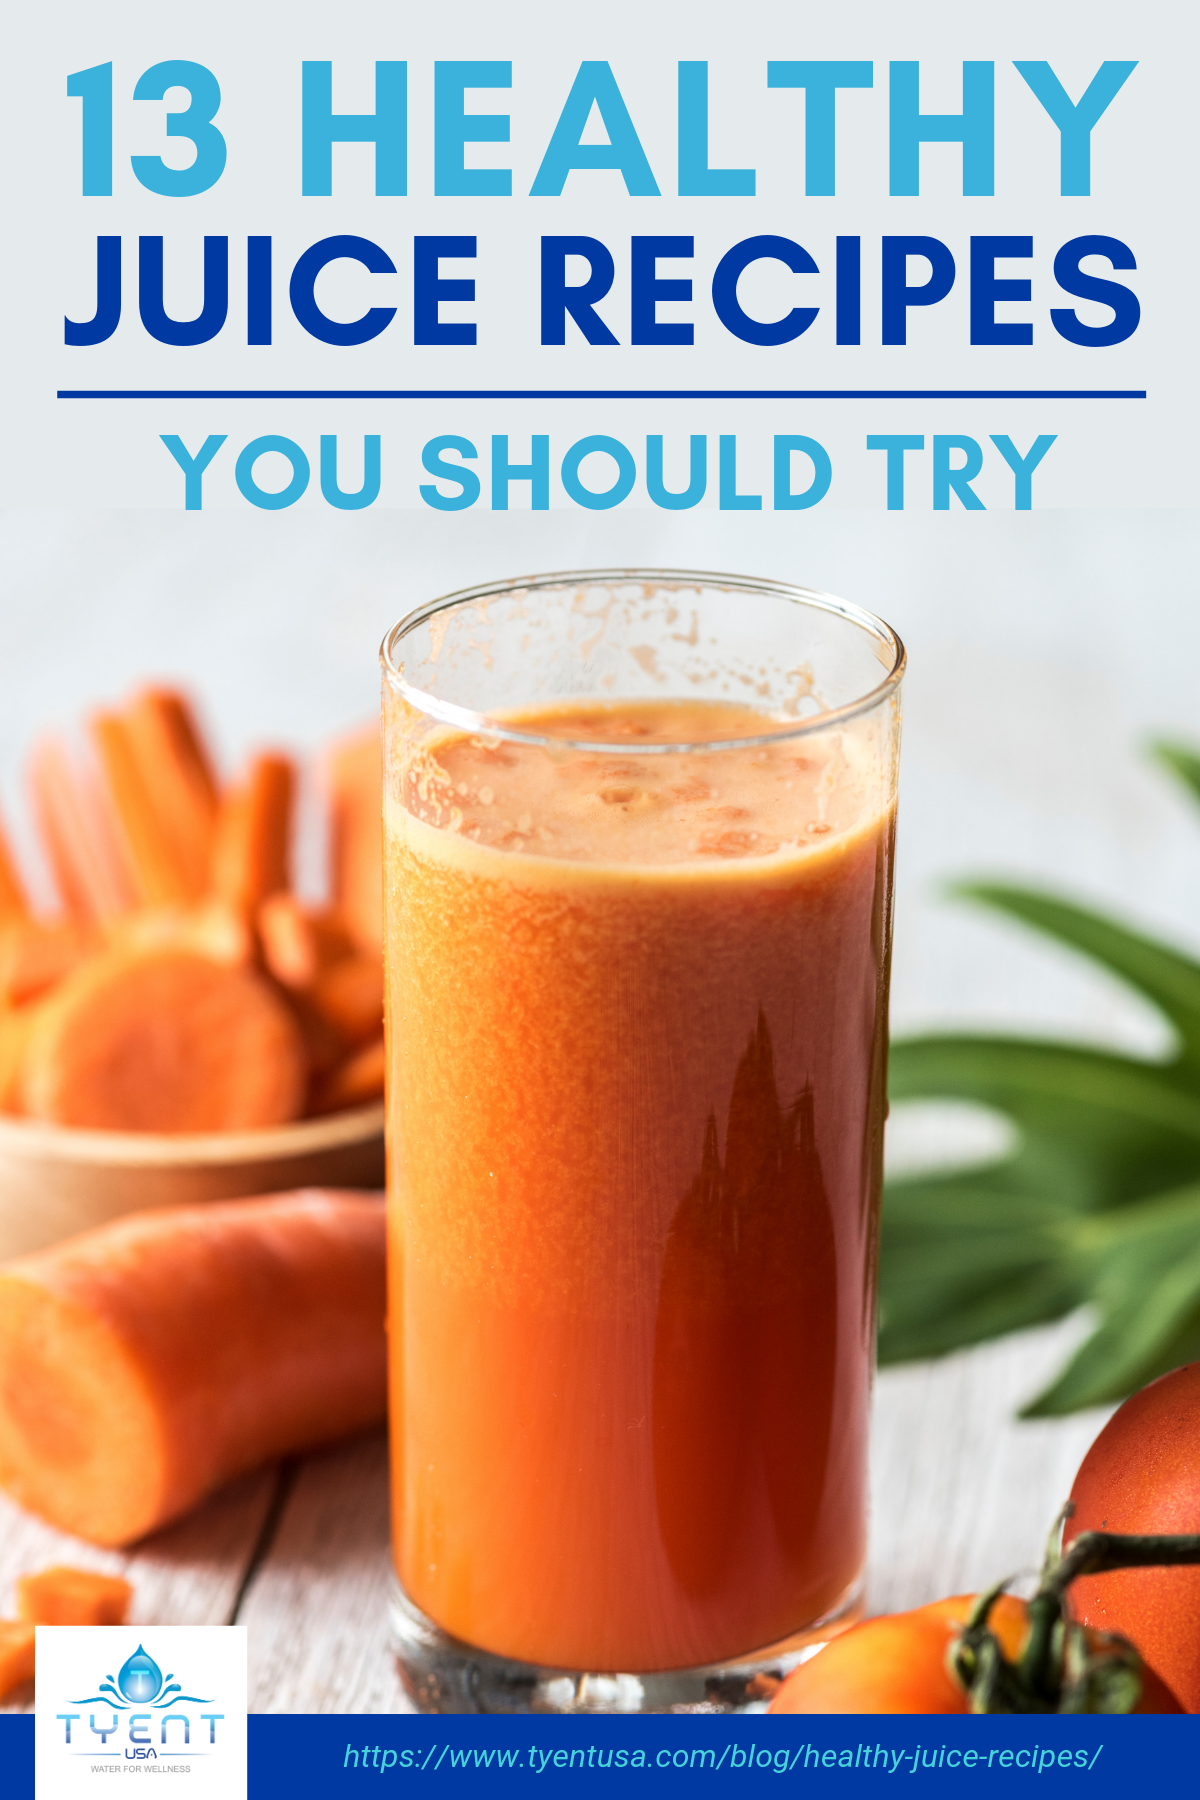 13 Healthy Juice Recipes You Should Try https://www.tyentusa.com/blog/healthy-juice-recipes/